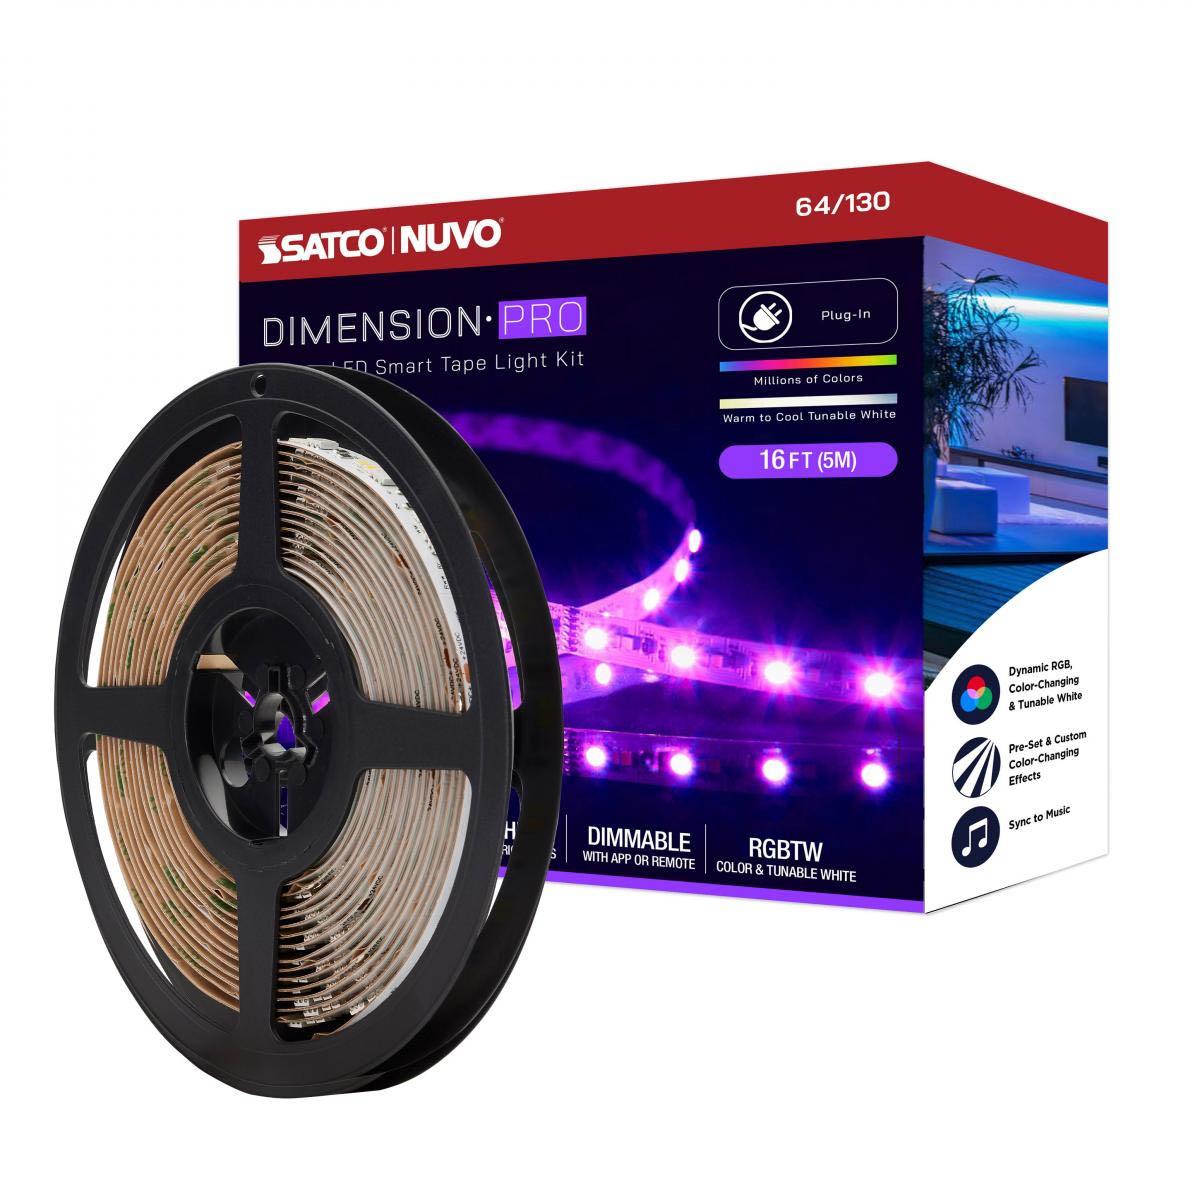 Dimension Pro LED Smart Tape Light Kit with Remote, 16ft Reel, Color Changing RGB and Tunable White, 24V, Plug Connection